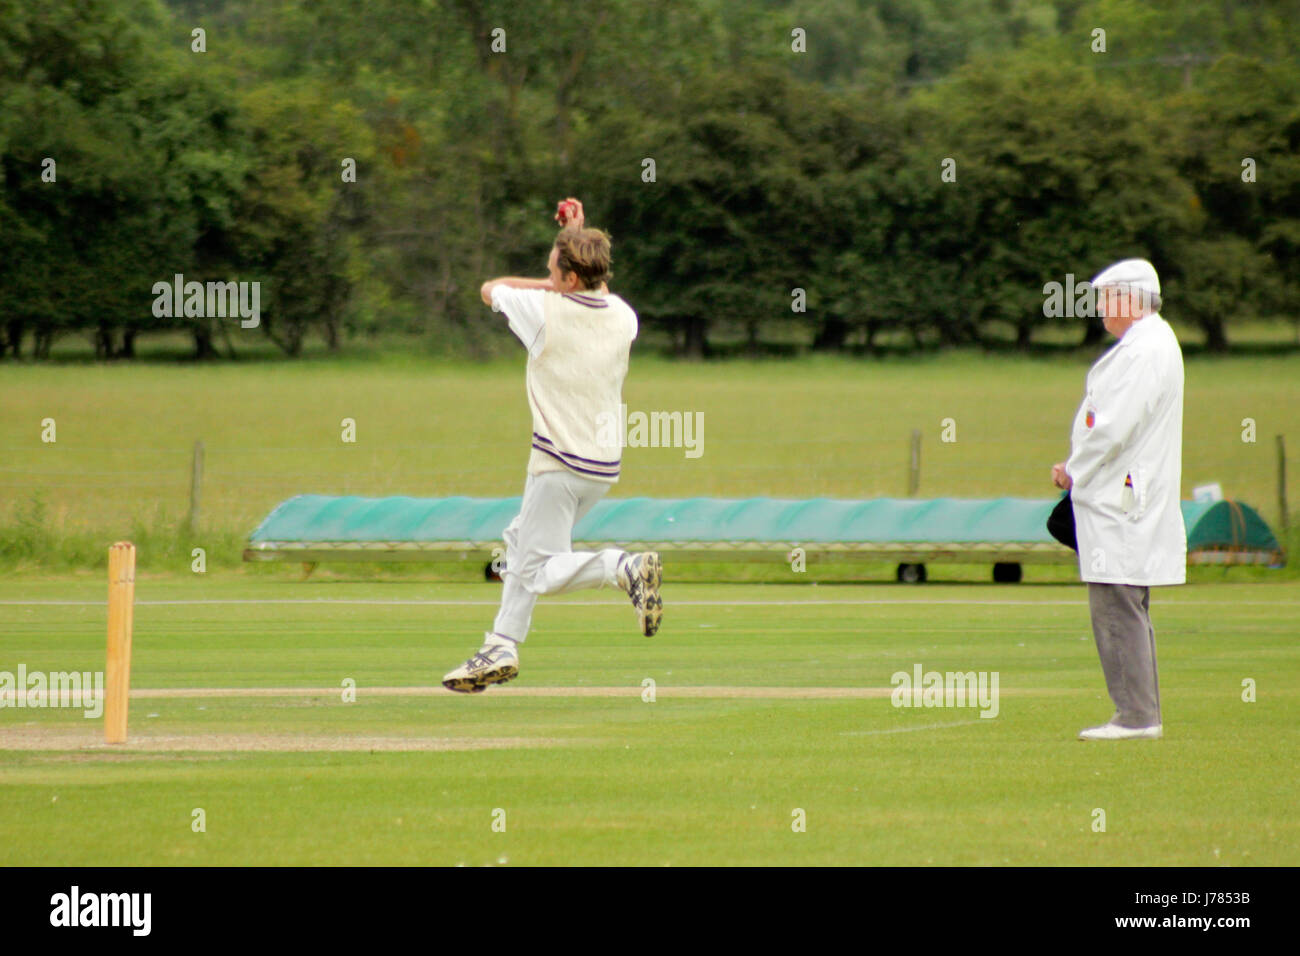 Bowler bowling infront of an umpire Stock Photo